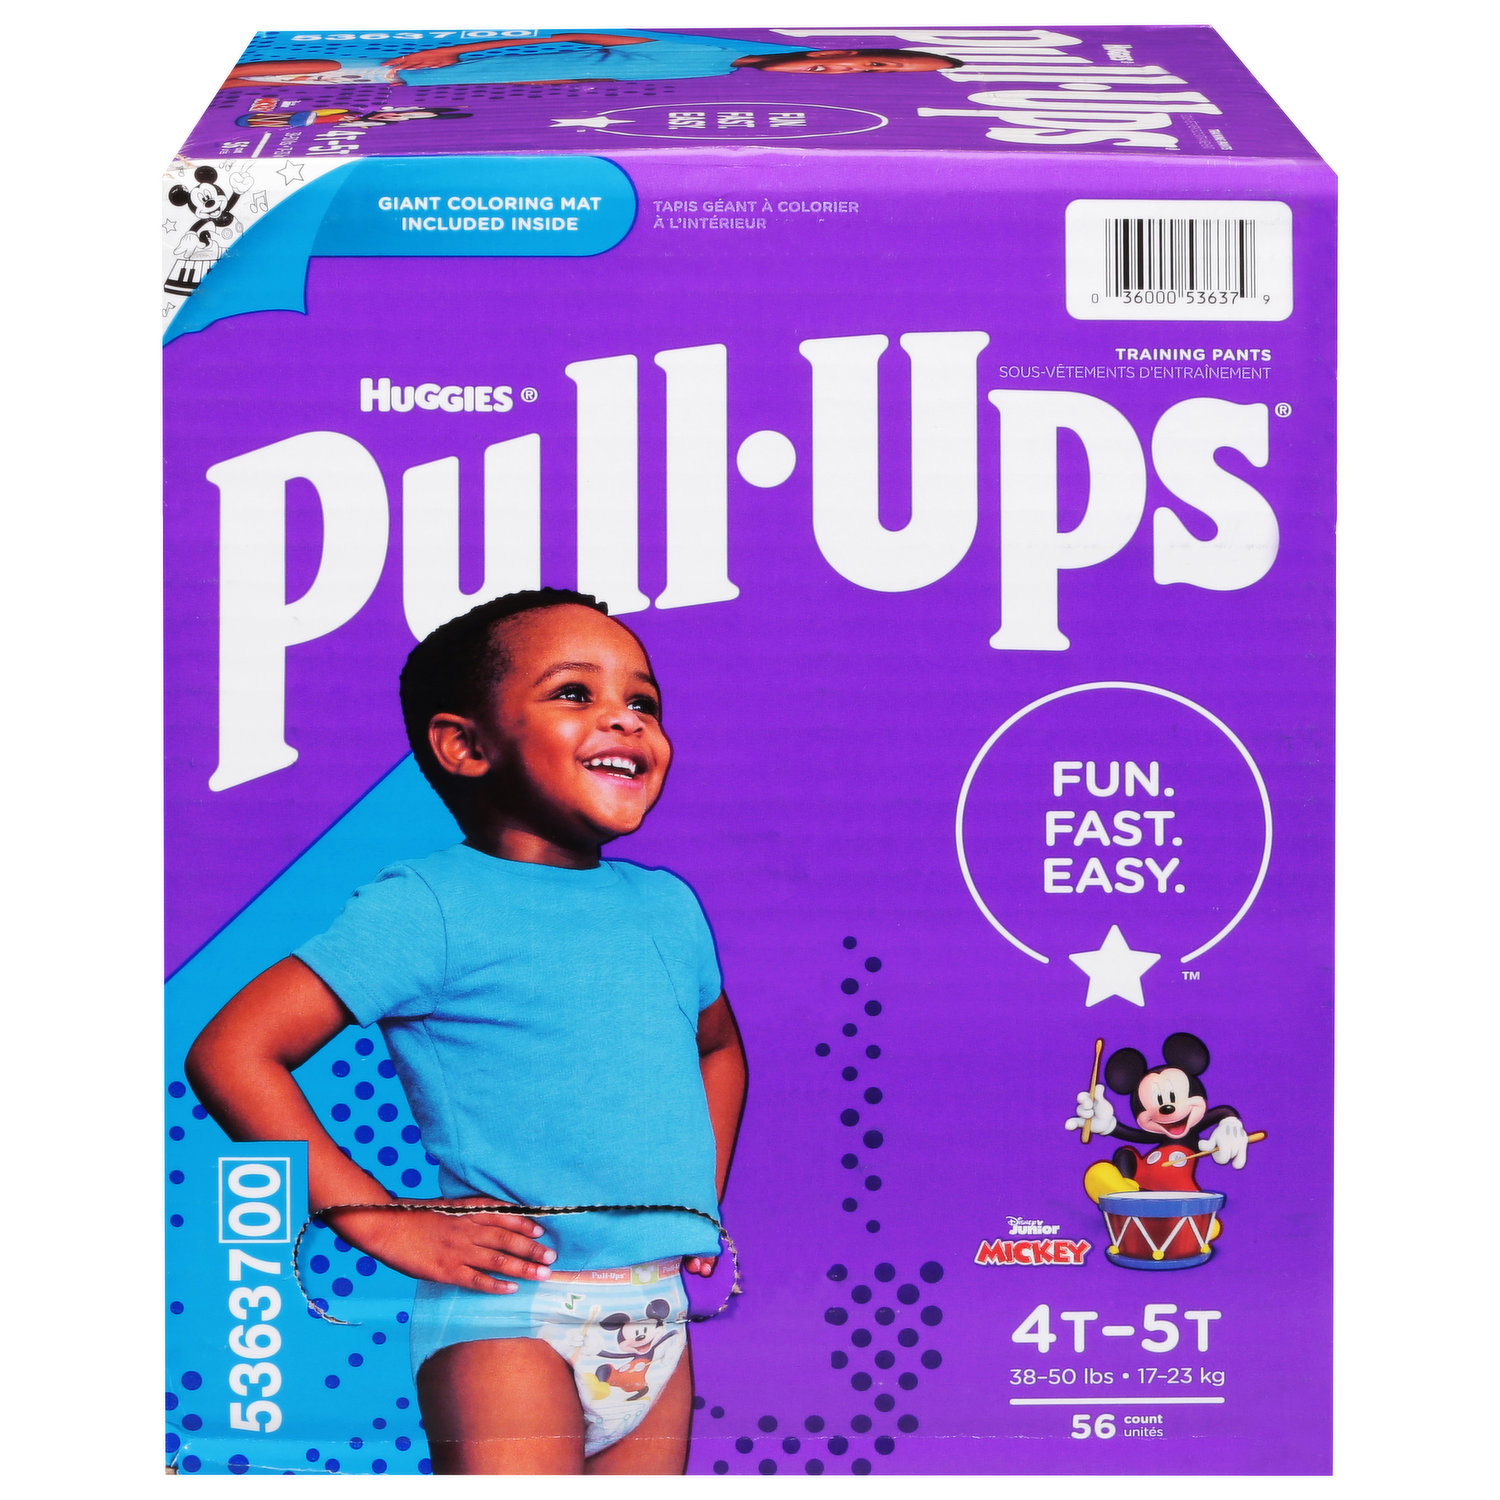  Pampers Easy Ups Pull On Training Pants My Little Pony, 4T-5T,  One Month Supply (104 Count) with Sensitive Water Based Baby Wipes 6X  Pop-Top Packs (336 Count) : Baby